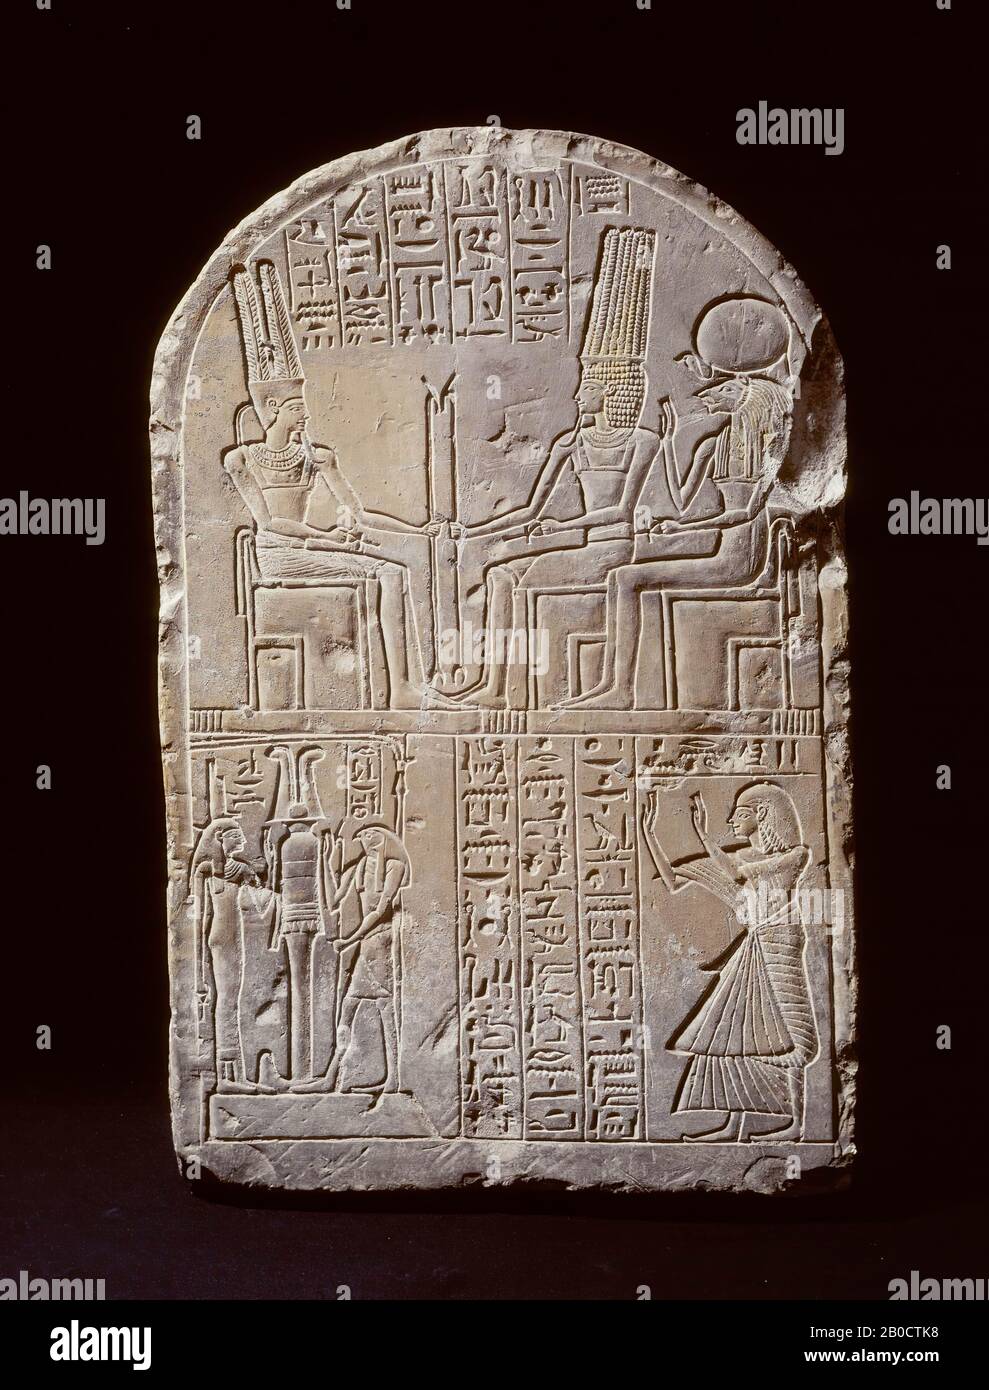 Penrennoe, round arch, stele, limestone, 52 x 34 x 7,5 cm, New Kingdom, 19th-20th Dynasty 1550-1196 BC, EgyptDescription of the Egyptian collection, VI, 33, Pl.XXI, J. van Dijk, The New Kingdom necropolis of Memphis (Groningen, 1992), 85 n. 2, H.D. Schneider, Life and Death (Perth, 1997), No. 15, C. Greco, Mossies Egípcies (Barcelona, 2012), 190, 190 cat. 205, P. Giovetti Stock Photo